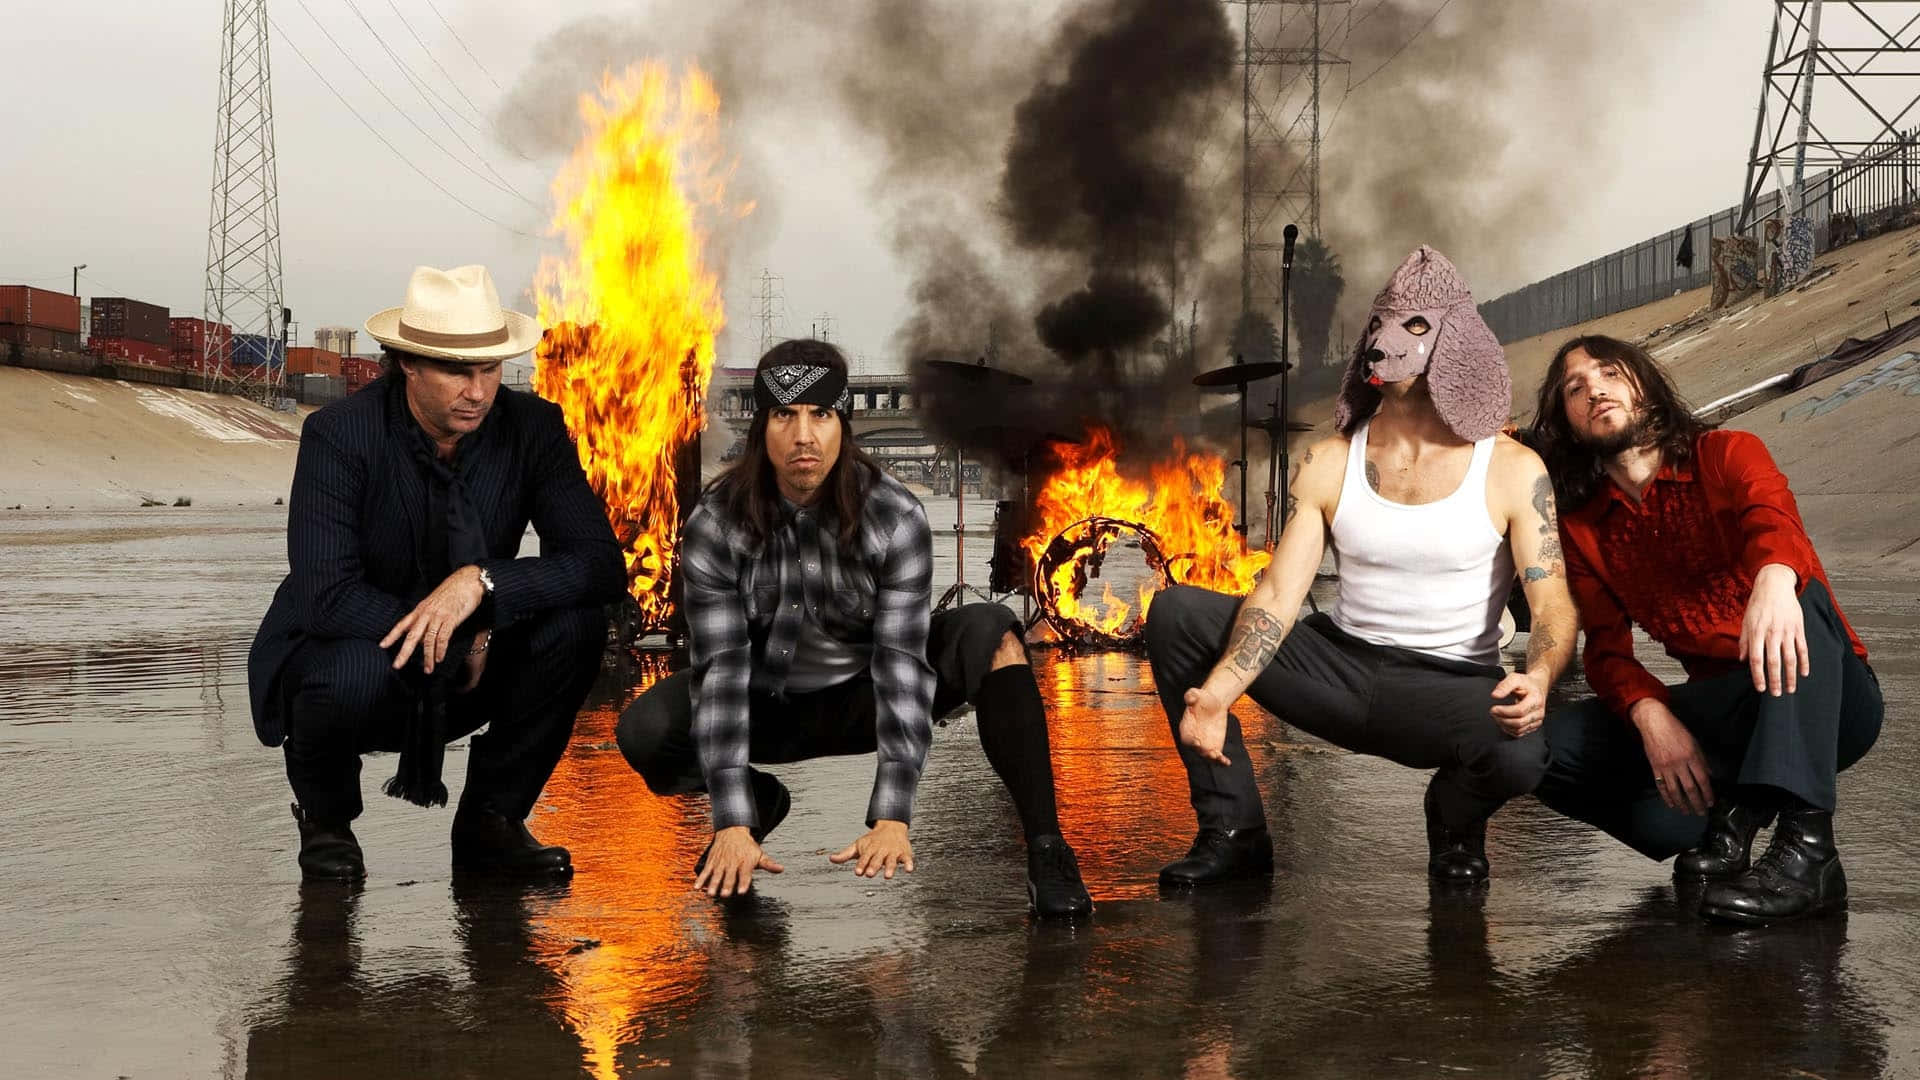 Red Hot Chili Peppers With Burning Equipment Wallpaper